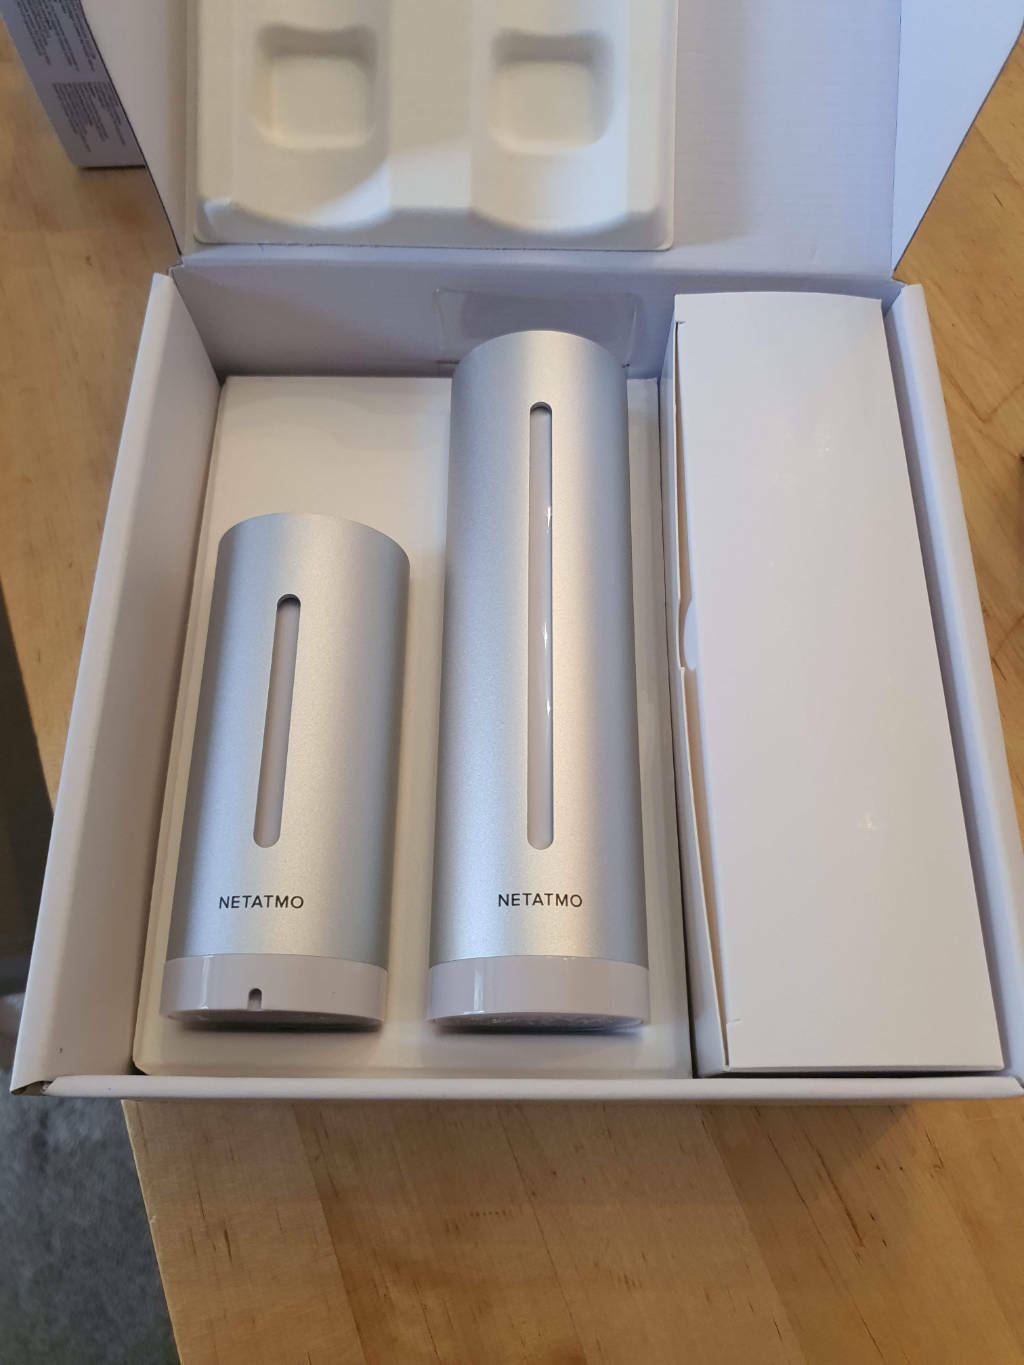 Photo of the indoor and outdoor Netatmo units